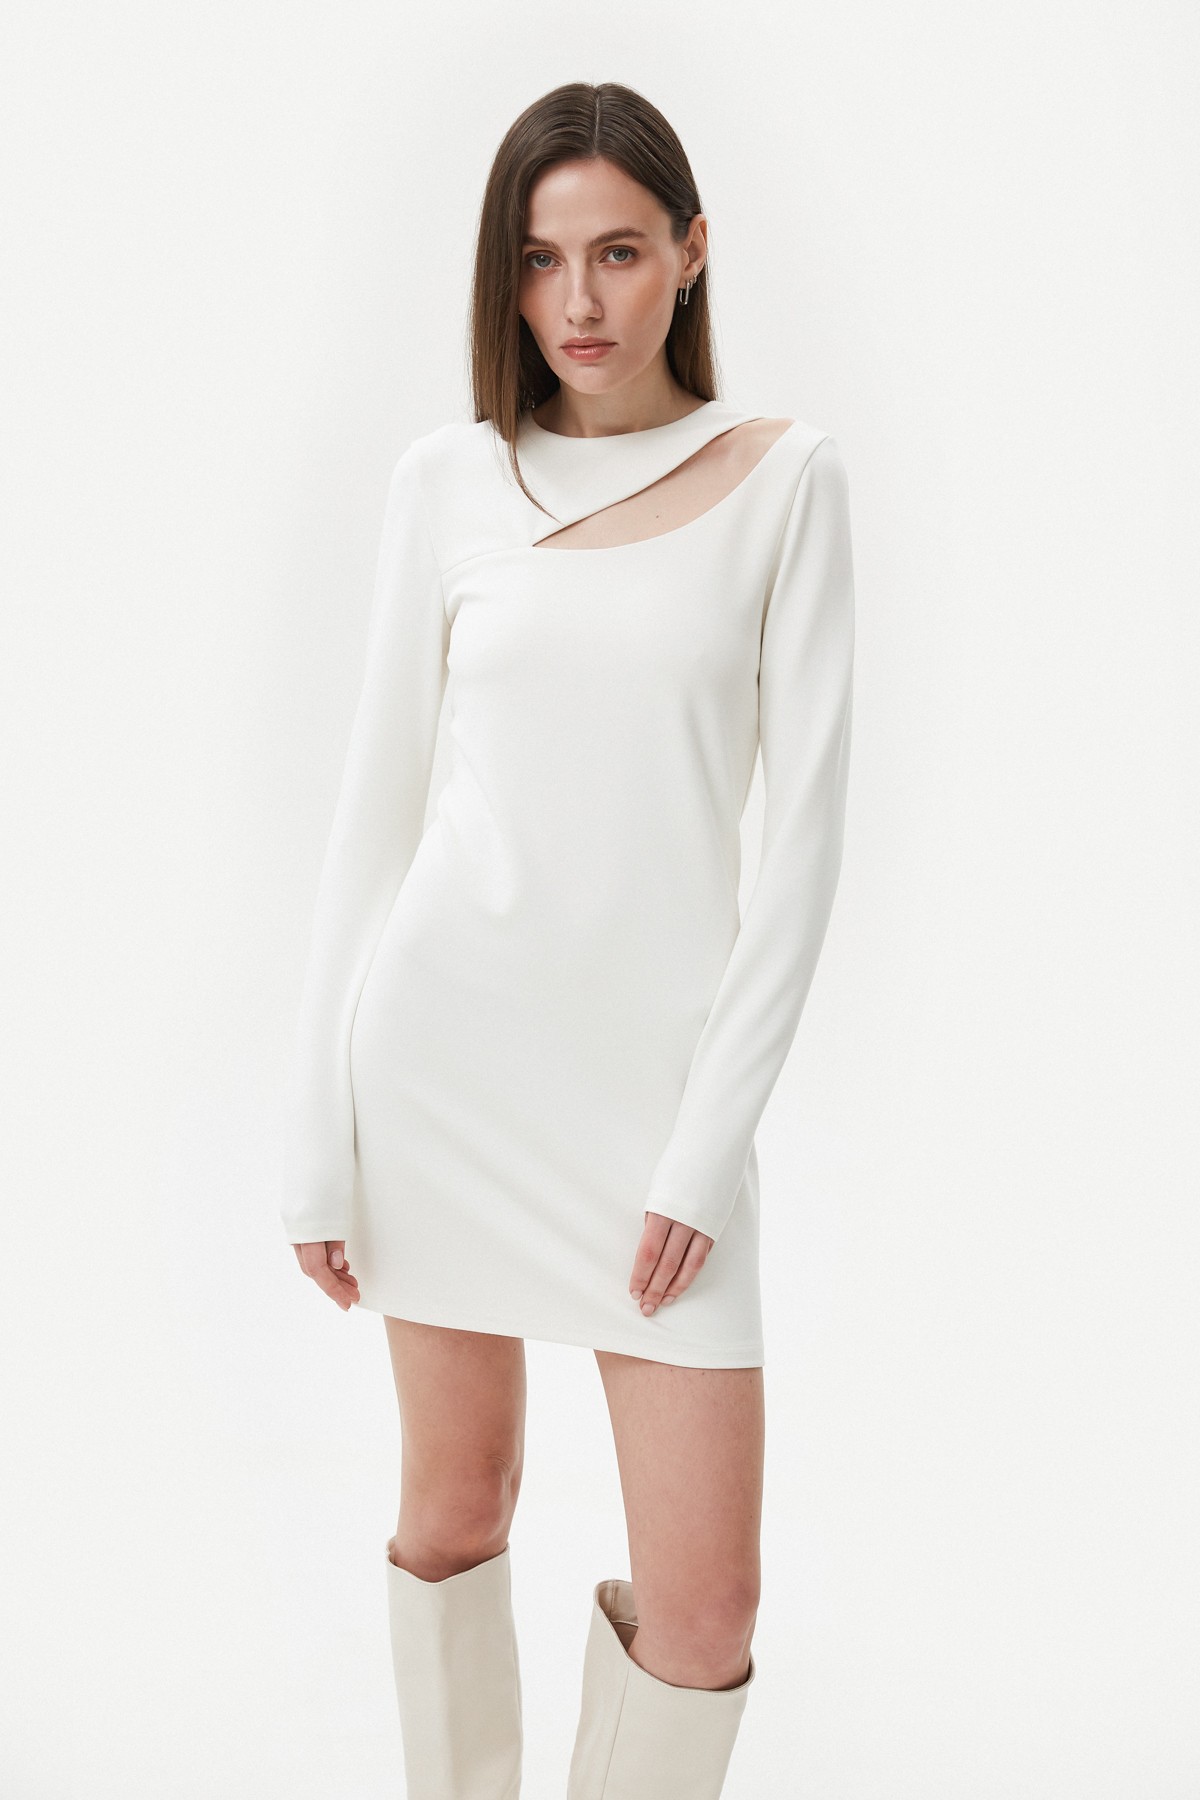 Milky short viscose dress with a shoulder cut out